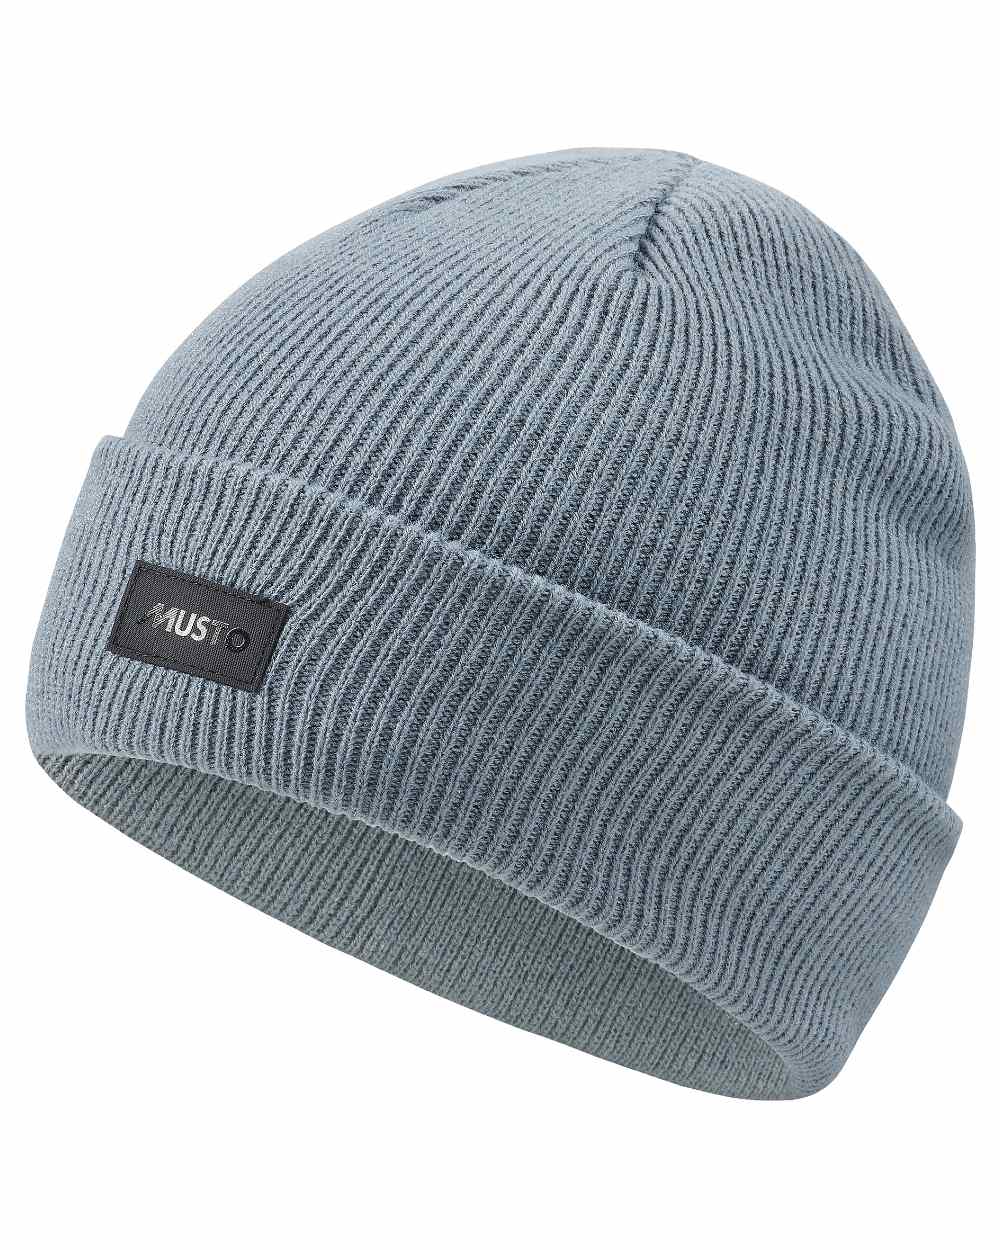 Musto Shaker Cuff Beanie in Stormy Weather 